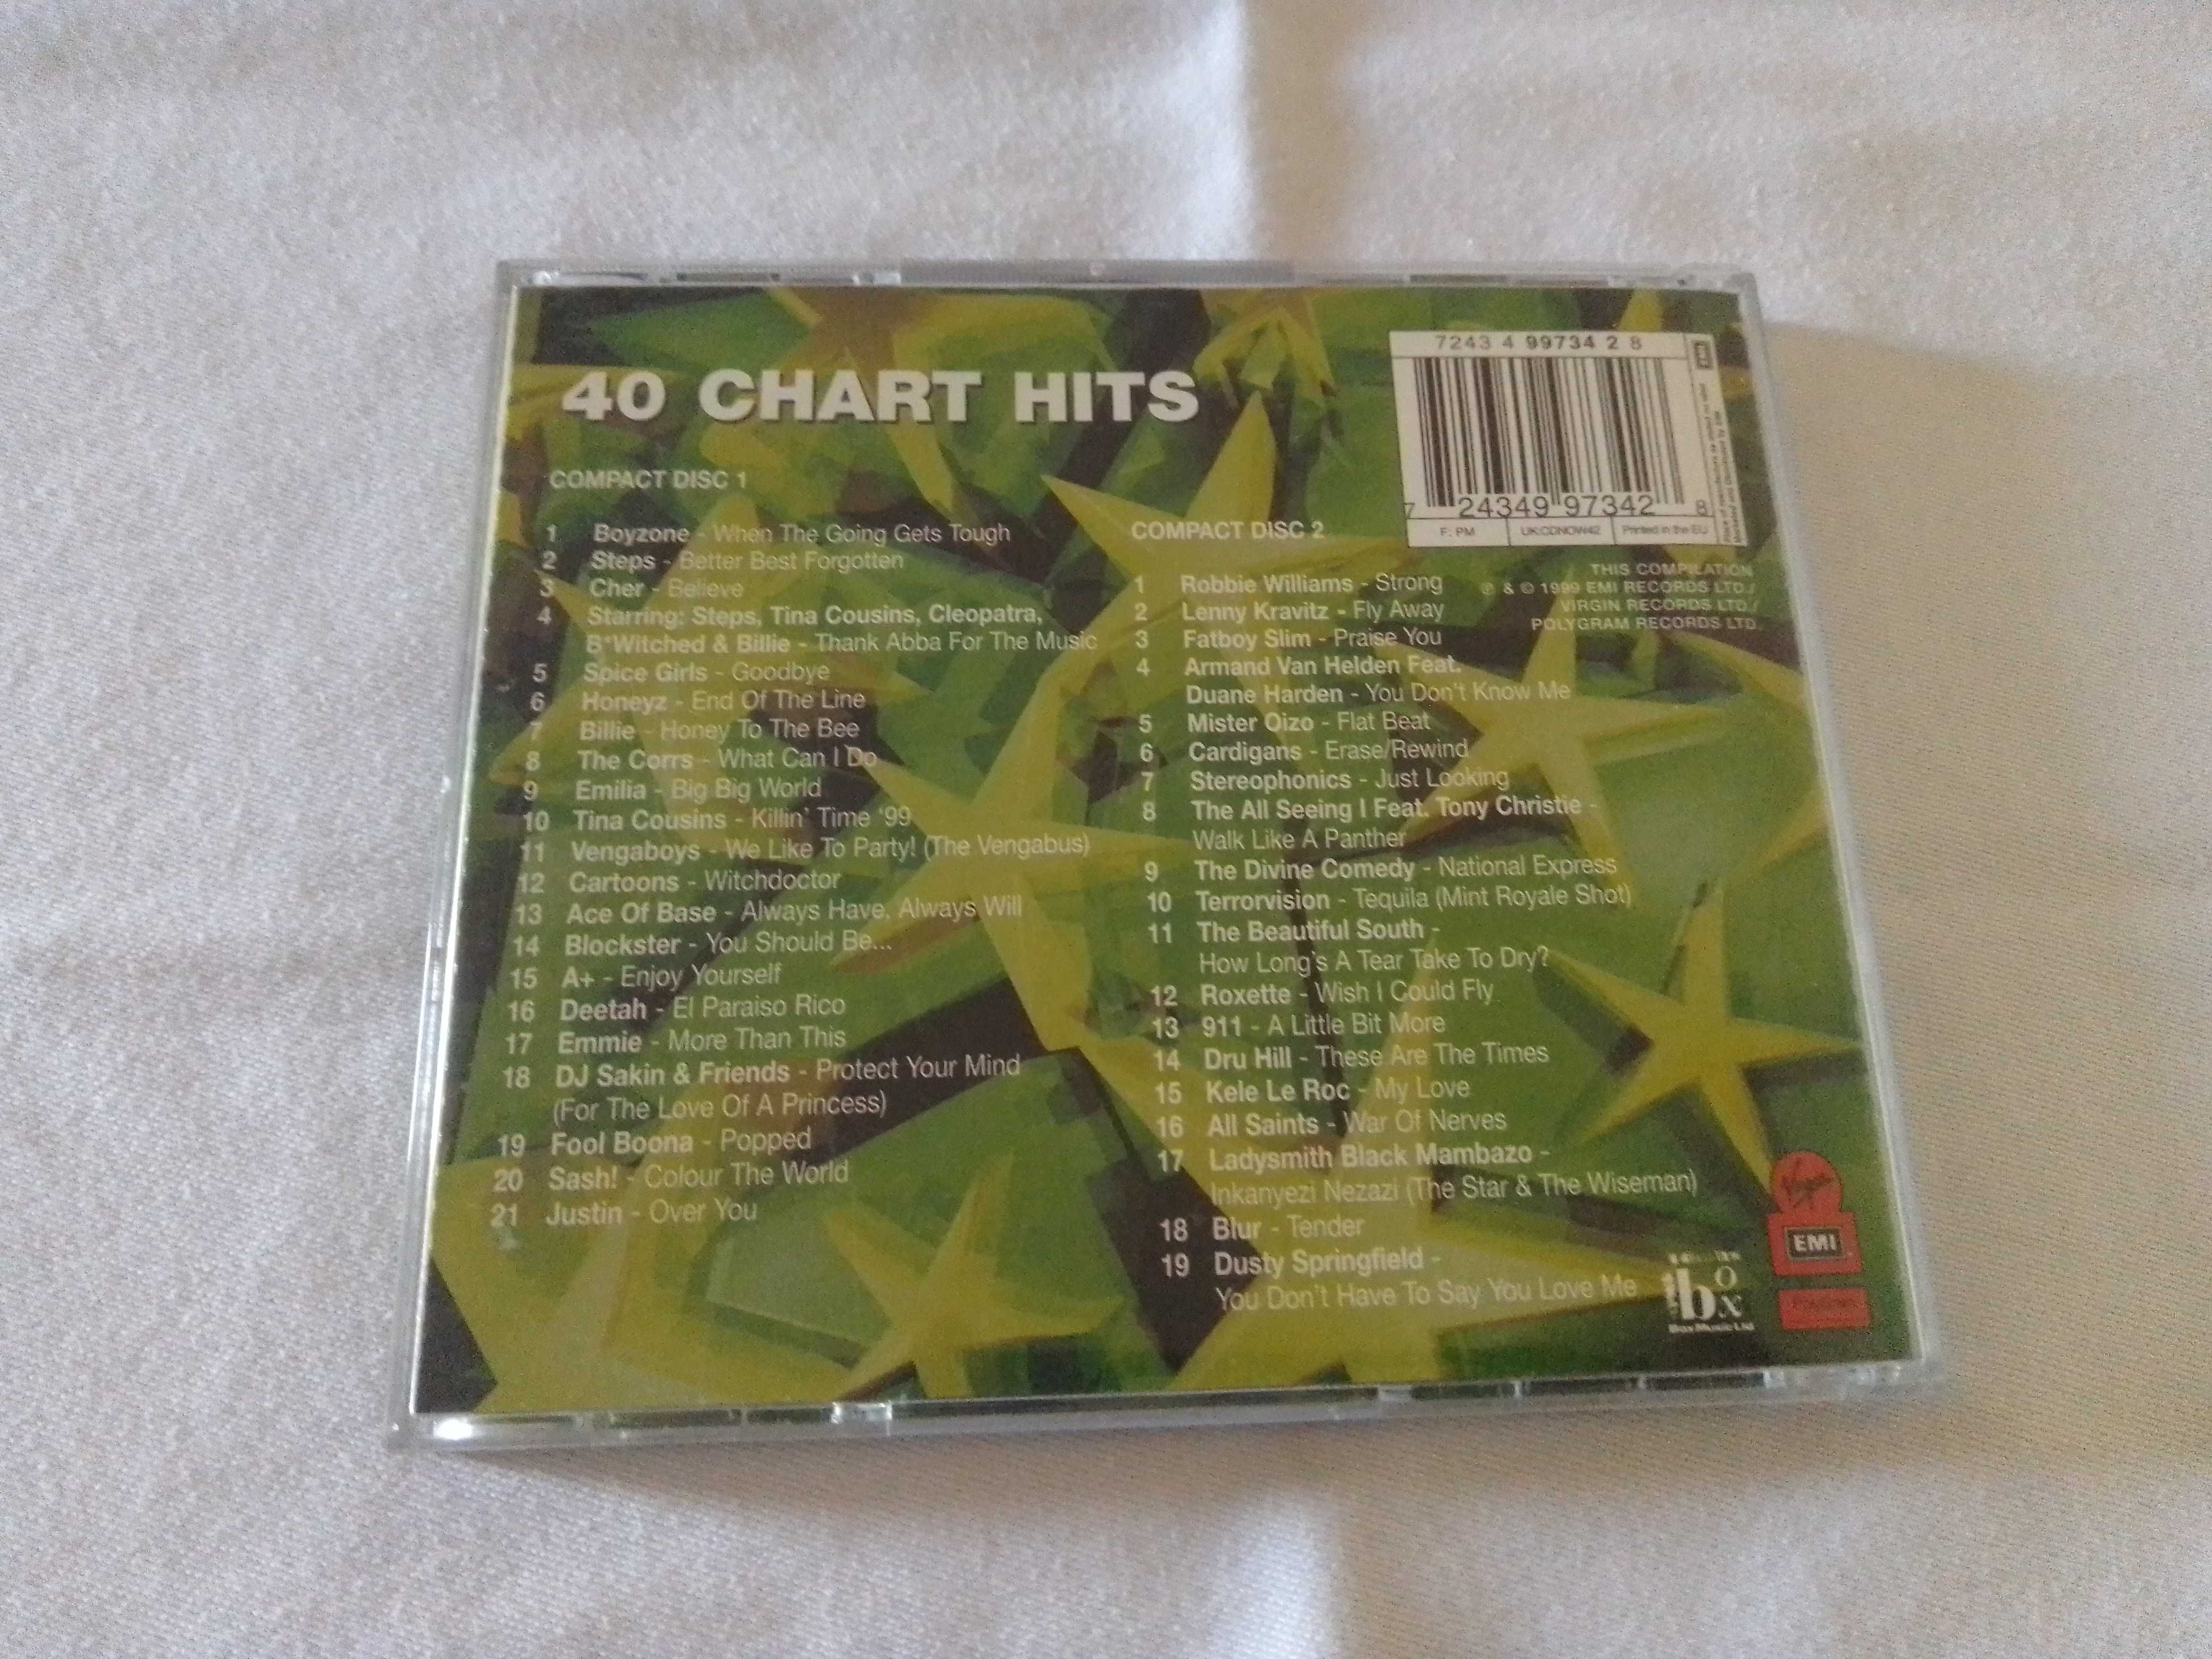 CD - Now That's What I Call Music! 42 - Colectânea, CD duplo (1999)